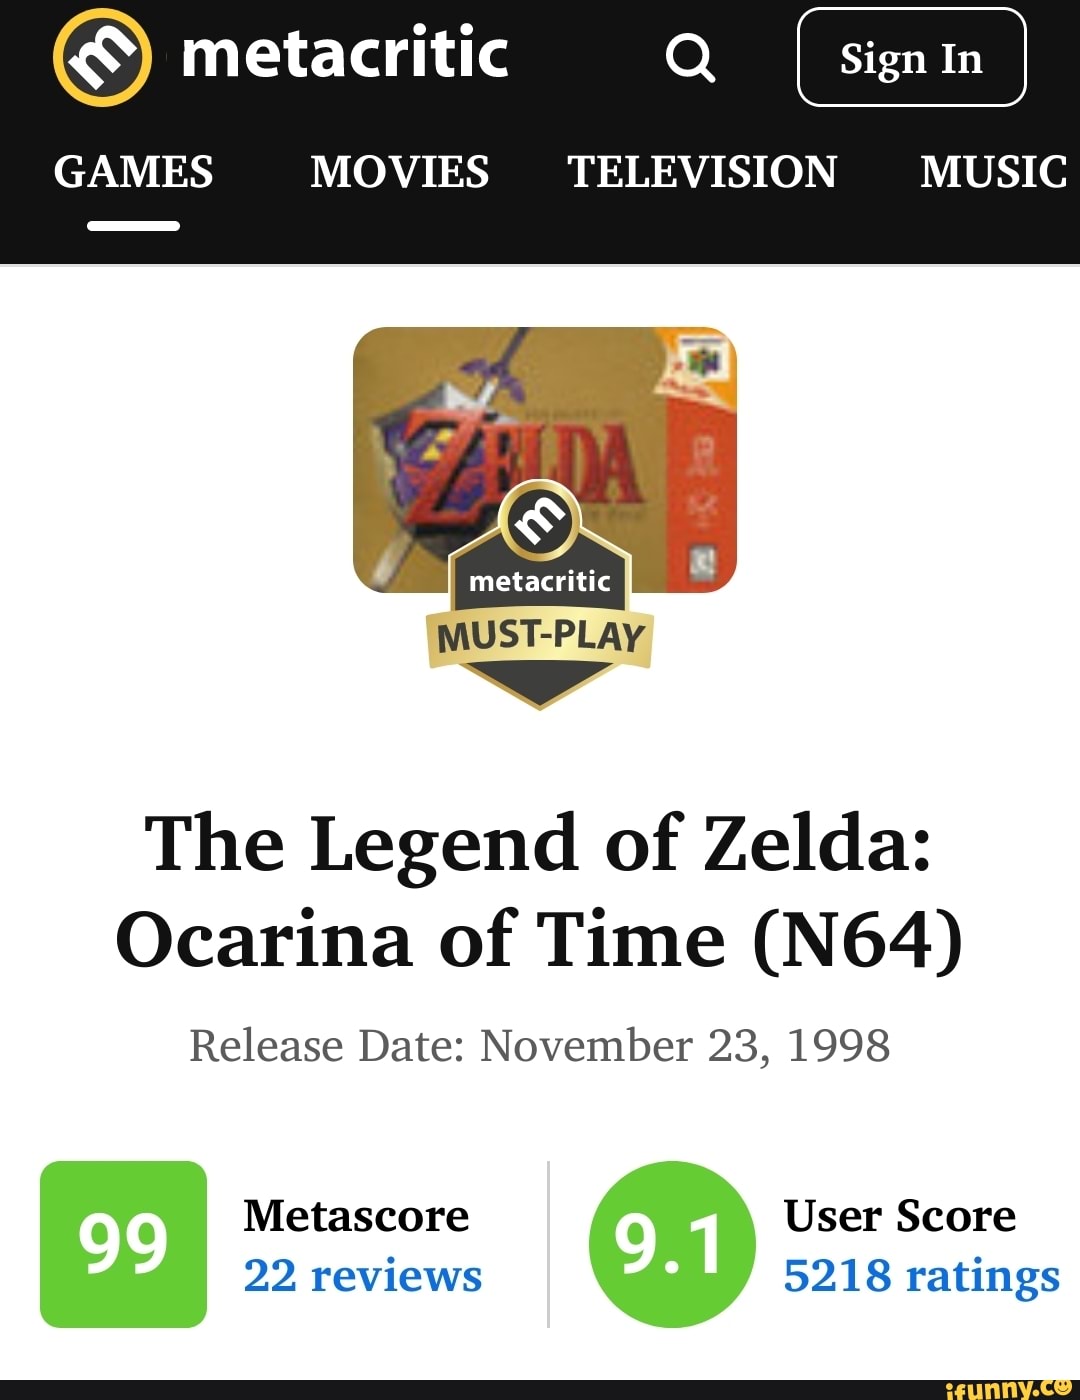 TIL The Legend Of Zelda: Ocarina Of Time for the Nintendo 64 is the only  game to ever get a 99 rating on Metacritic making it the best rated game of  all